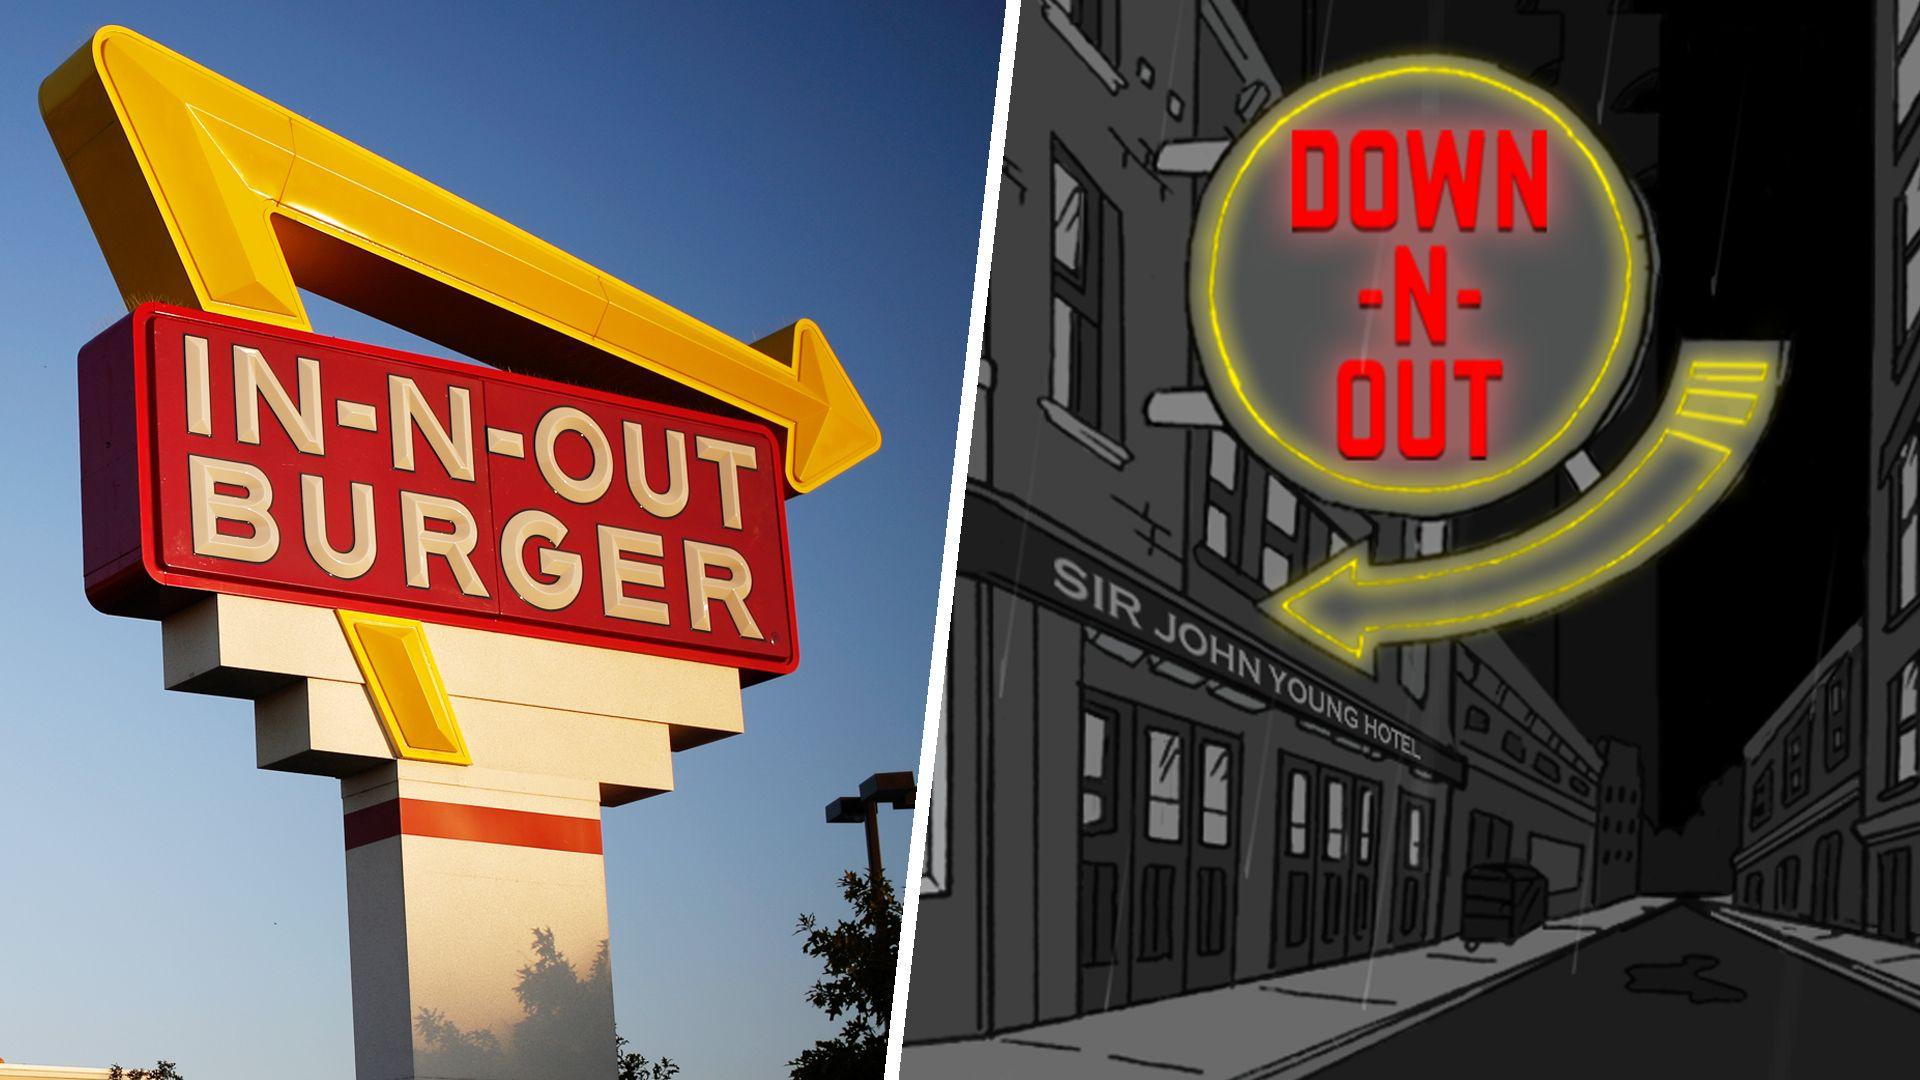 In N Out Logo - In N Out Sues Australian Burger Joint Down N' Out